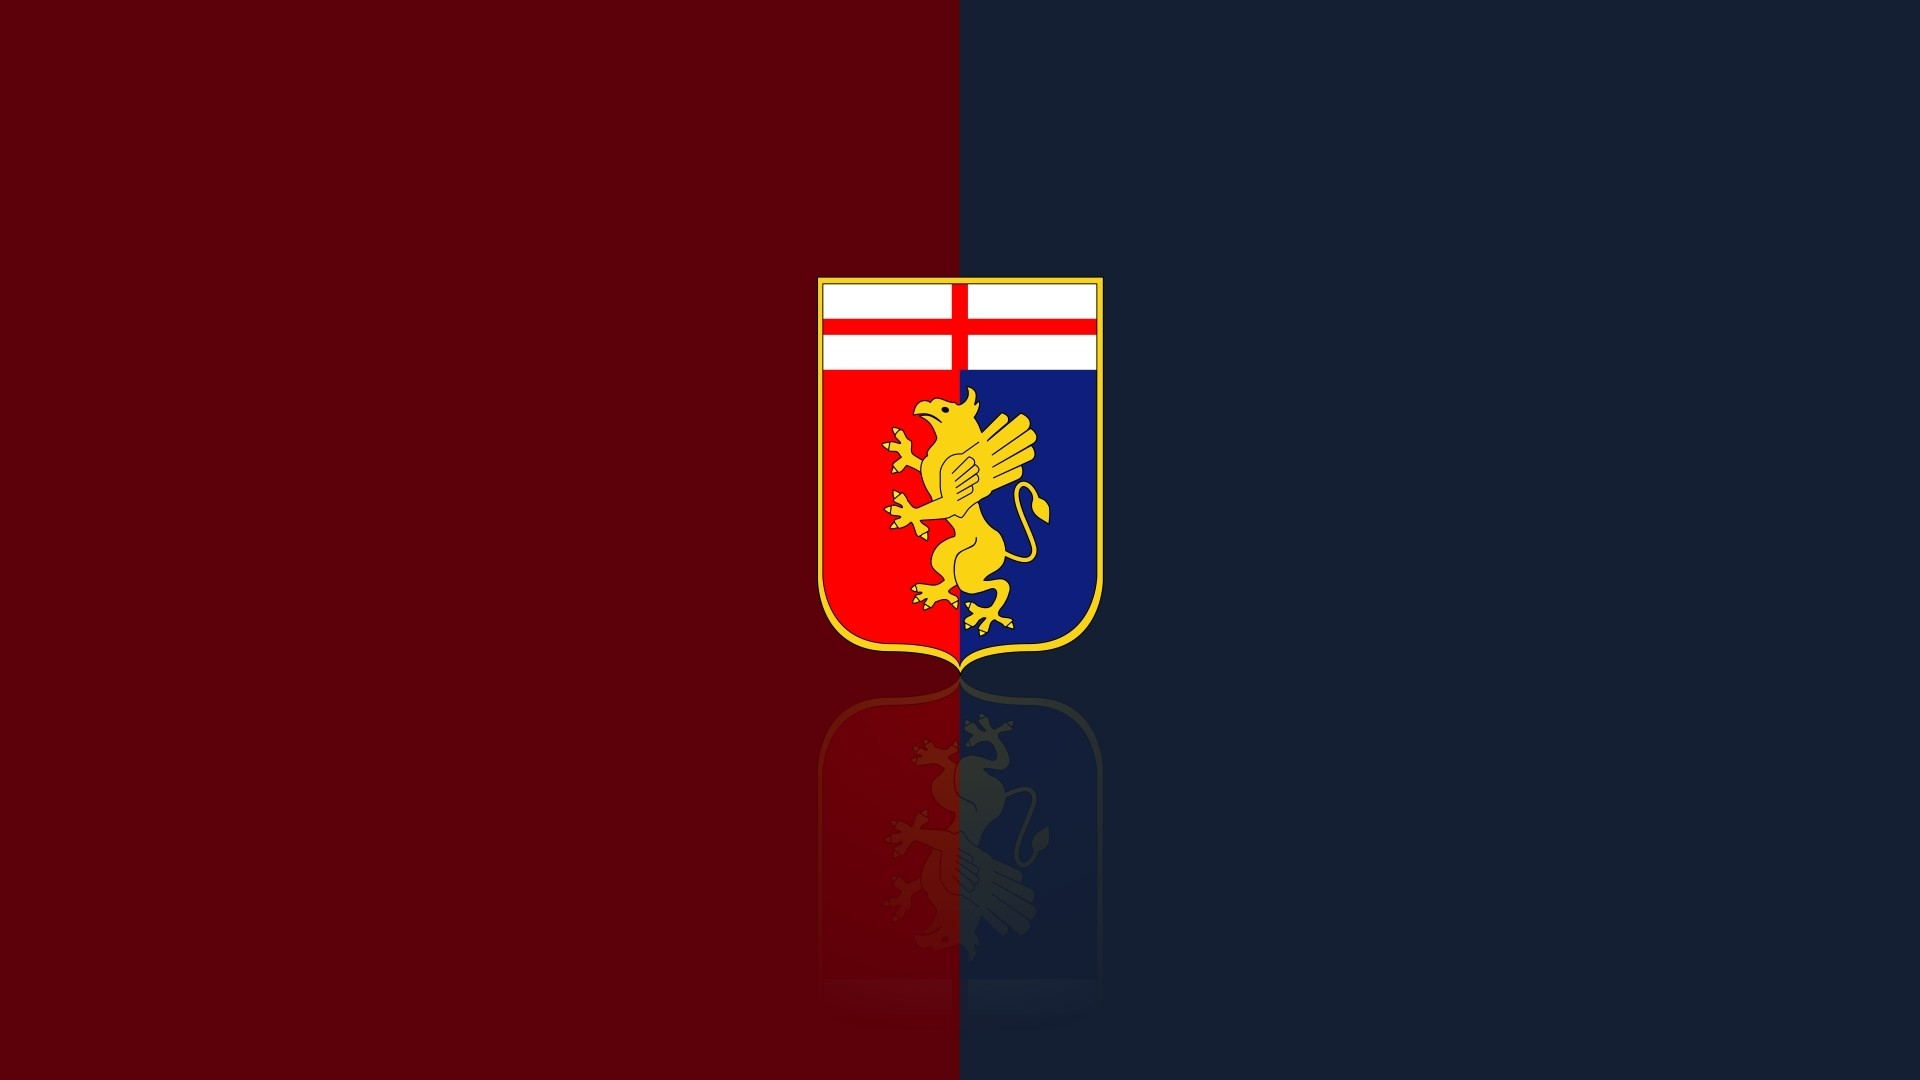 Genoa CFC Wallpaper HD with high-resolution 1920x1080 pixel. You can use this wallpaper for your Desktop Computers, Mac Screensavers, Windows Backgrounds, iPhone Wallpapers, Tablet or Android Lock screen and another Mobile device